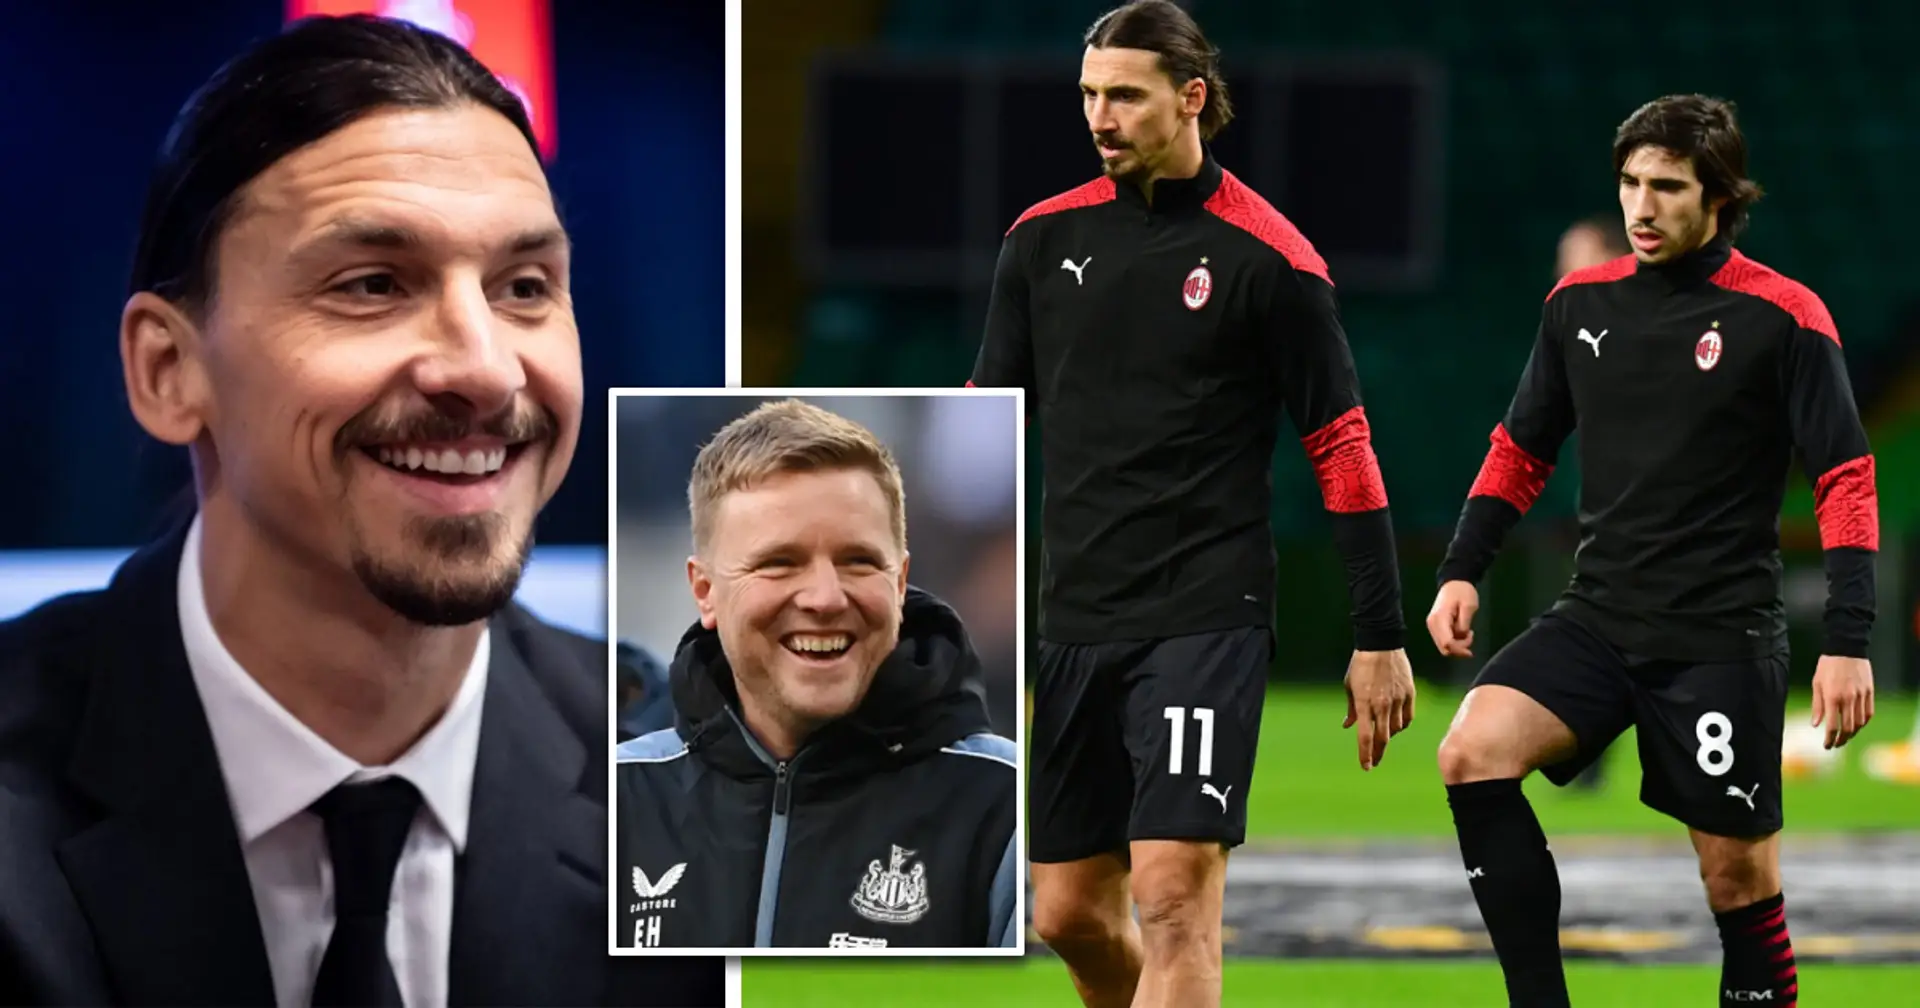 'I made him understand': Ibrahimovic reveals major role he played in Tonali’s journey to Premier League